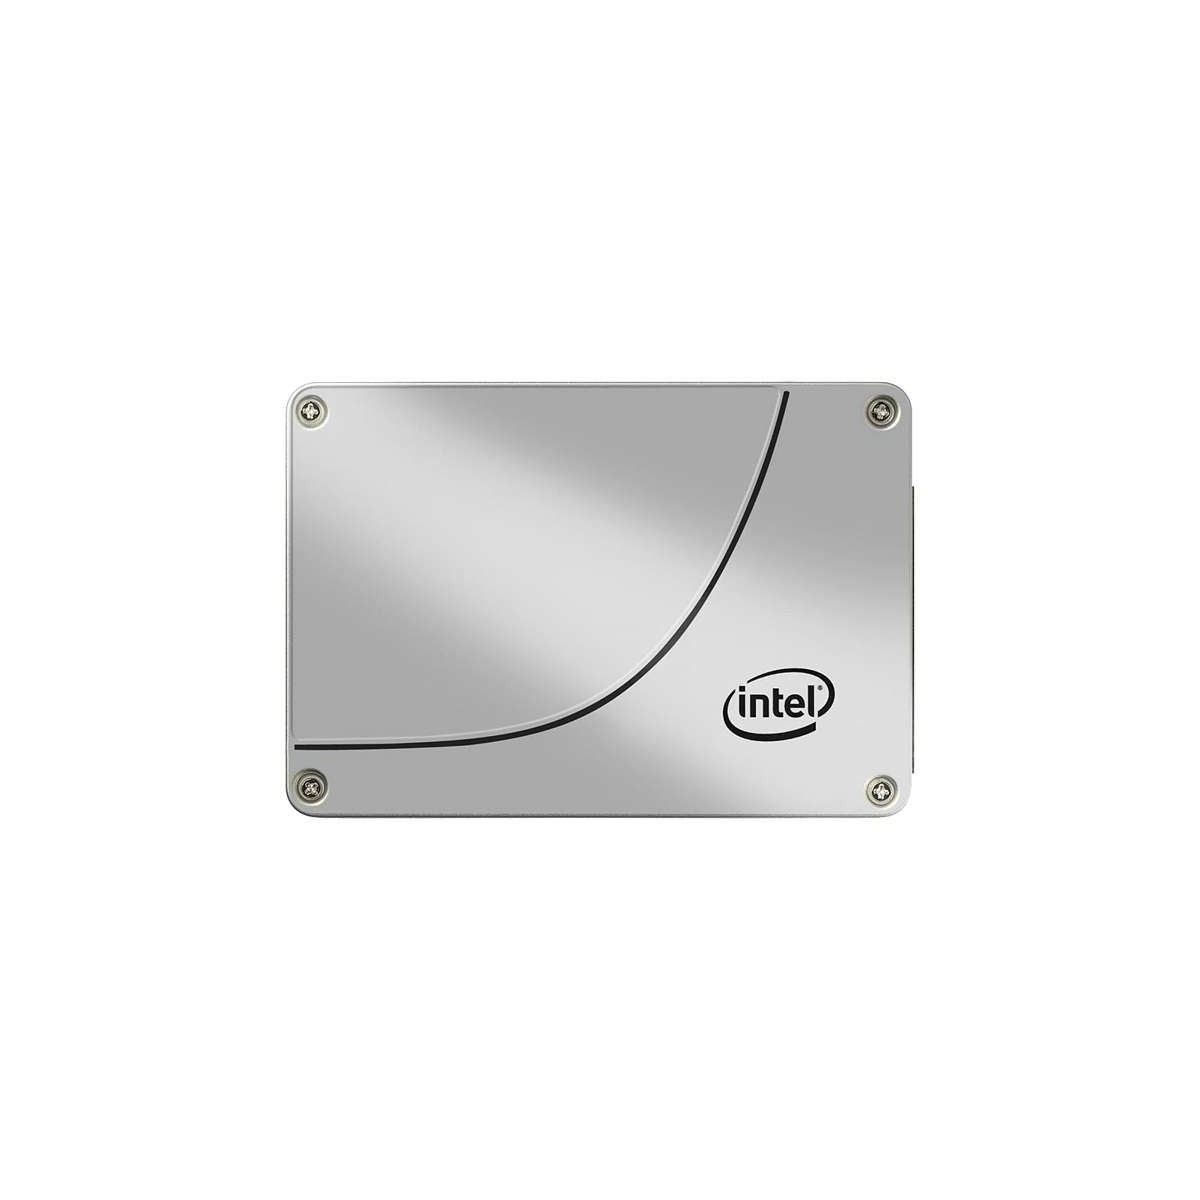 Intel Solid-State Drive DC S3610 Series 2.5 SATA 400 GB - Solid State Disk - Internal